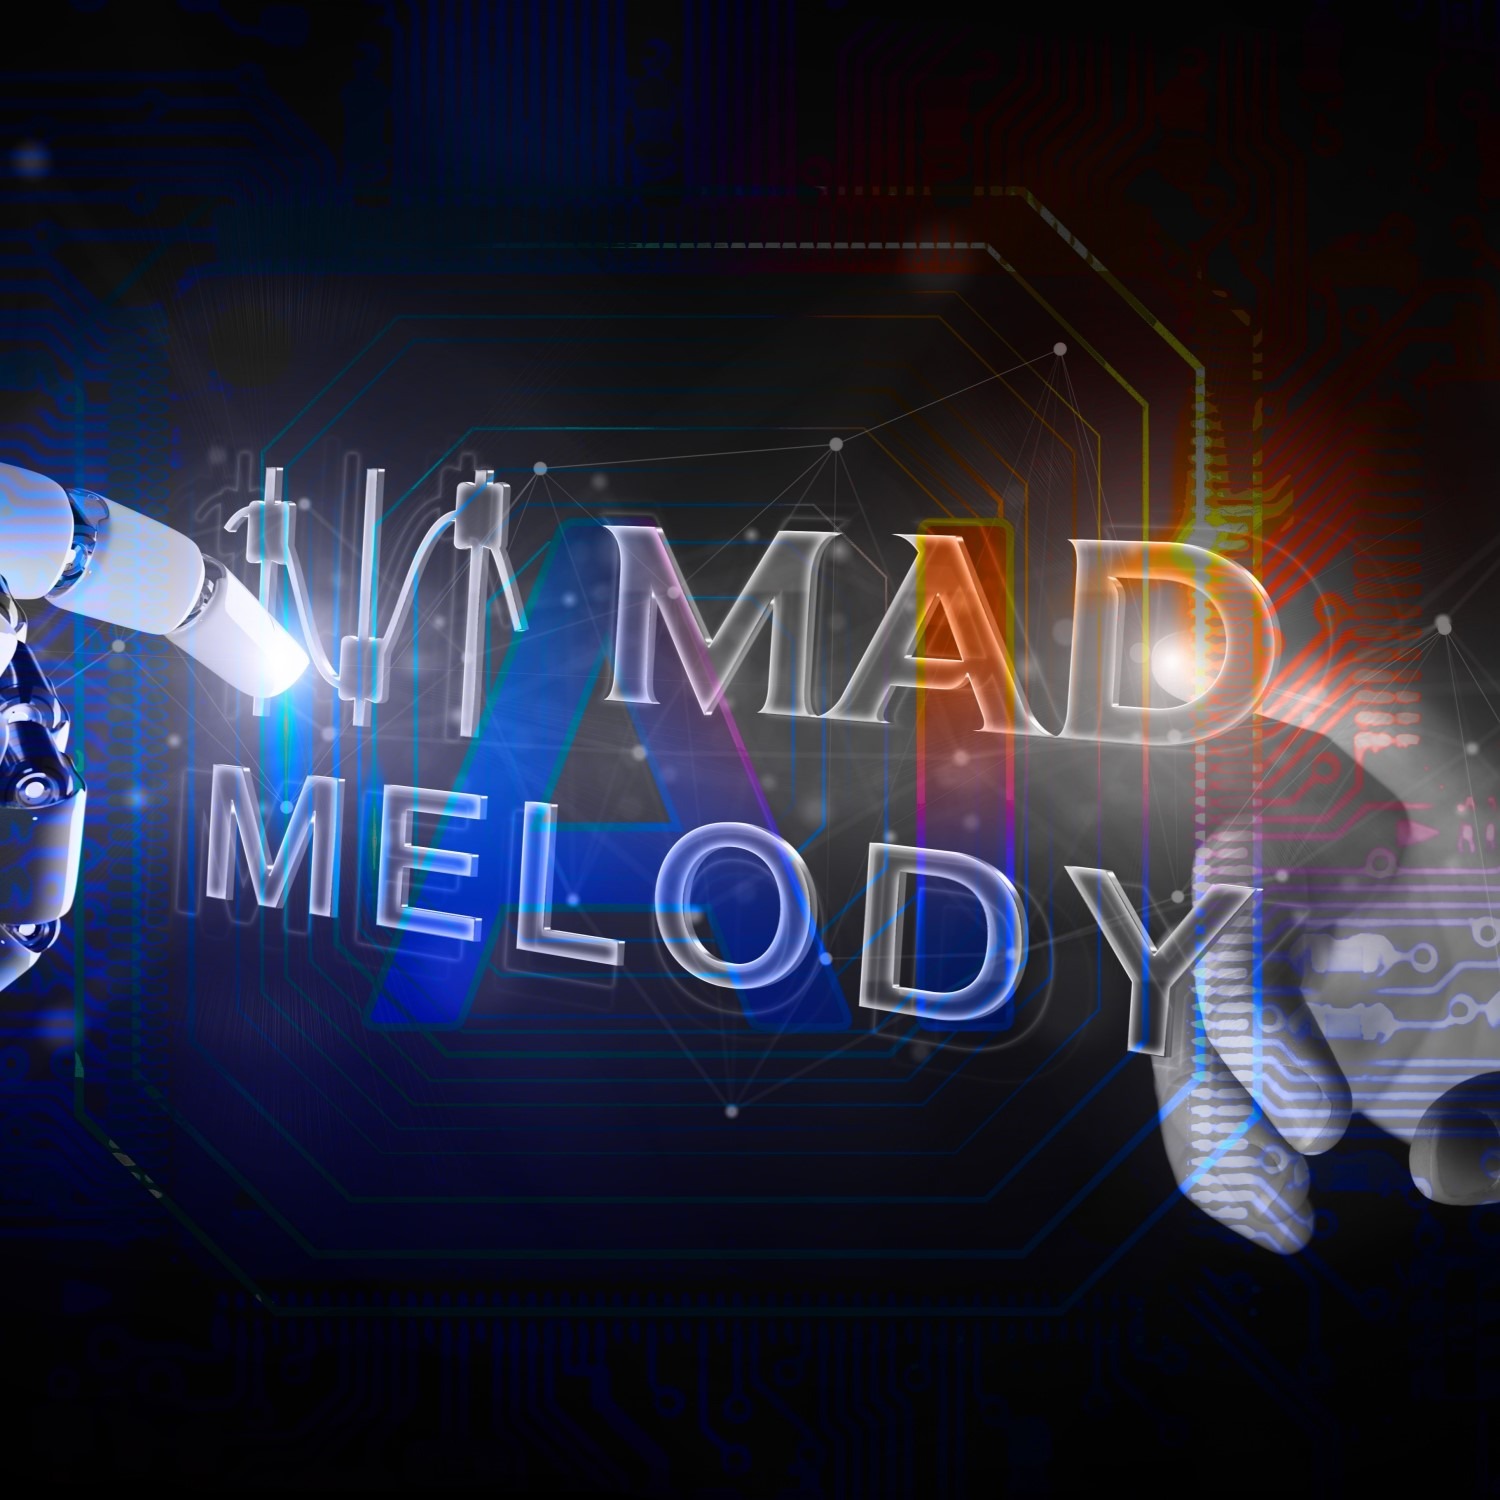 Mad Melody